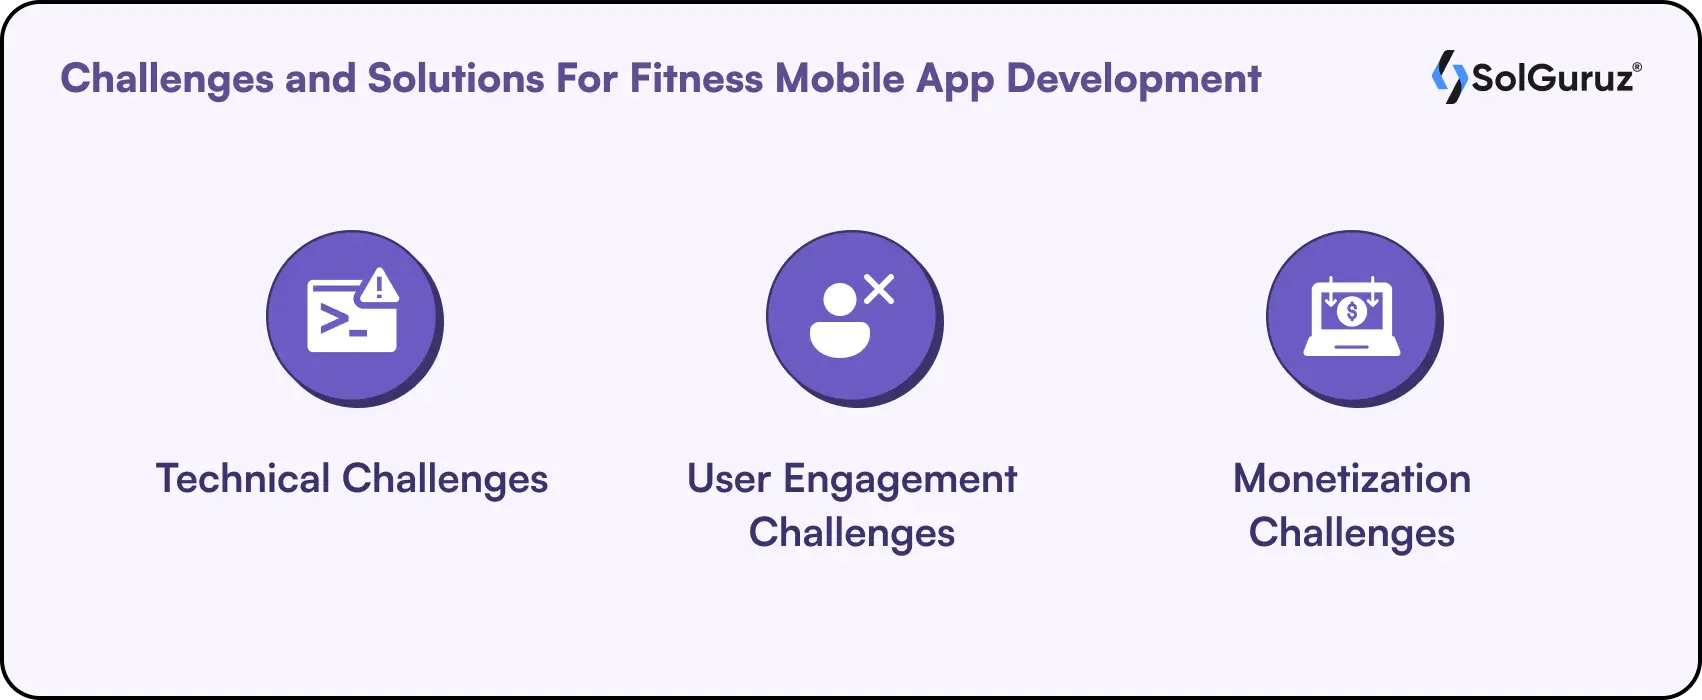 Challenges and Solutions For Fitness Mobile App Development